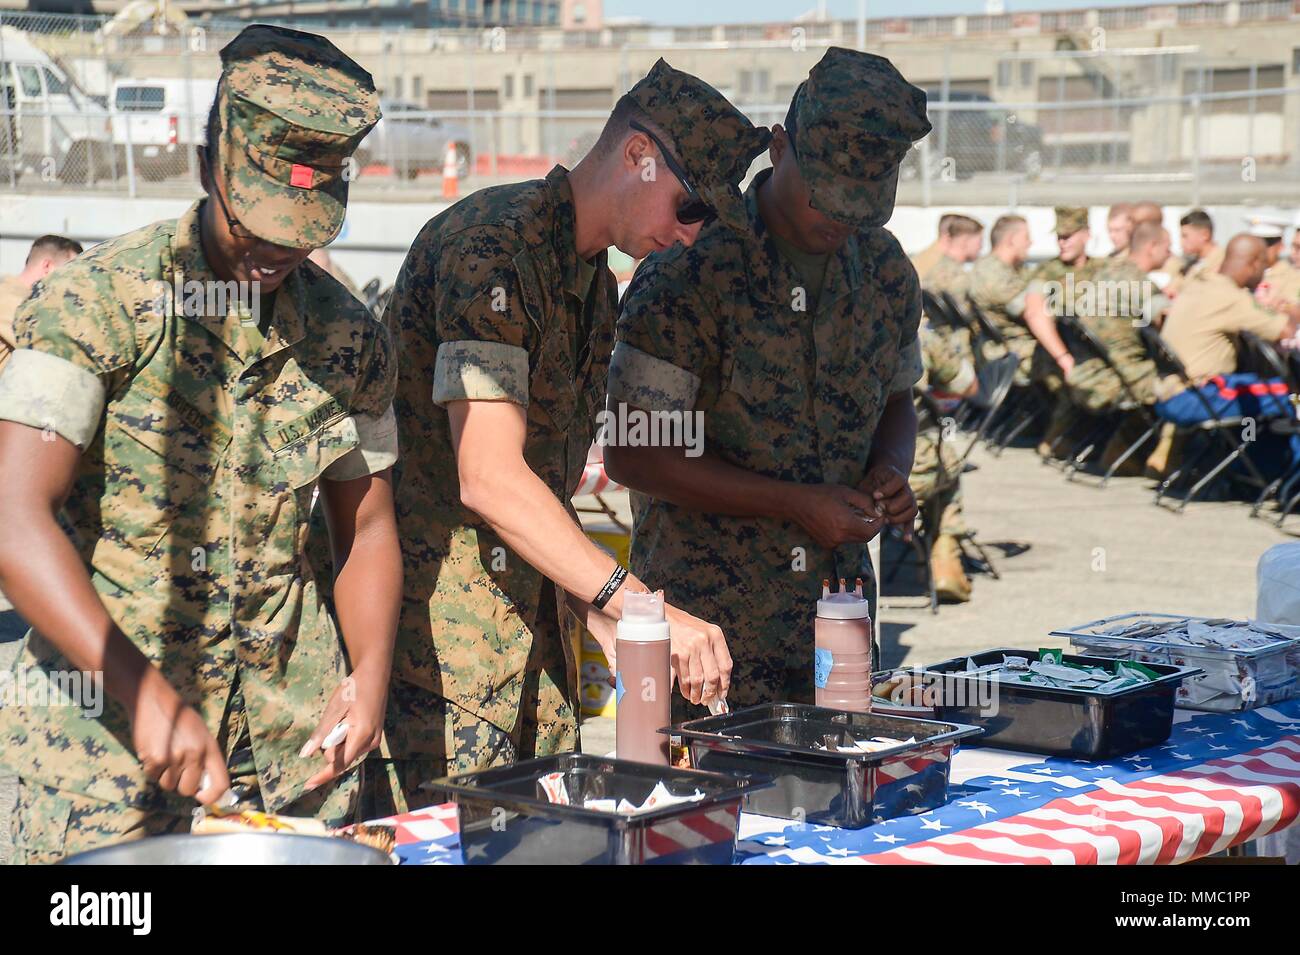 SAN FRANCISCO (Oct. 8, 2017) Marines prepare plates at a barbecue hosted by the Oakland Navy League, Oakland Police Department and local civic organizations during Fleet Week San Francisco 2017. Fleet week provides an opportunity for the American public to meet their Navy, Marine Corps, and Coast Guard team and to experience America’s sea services. Fleet Week San Francisco will highlight naval personnel, equipment, technology, and capabilities, with an emphasis on humanitarian assistance and disaster response. (U.S. Navy photo by Mass Communication Specialist 1st Class Anthony Walker) Stock Photo